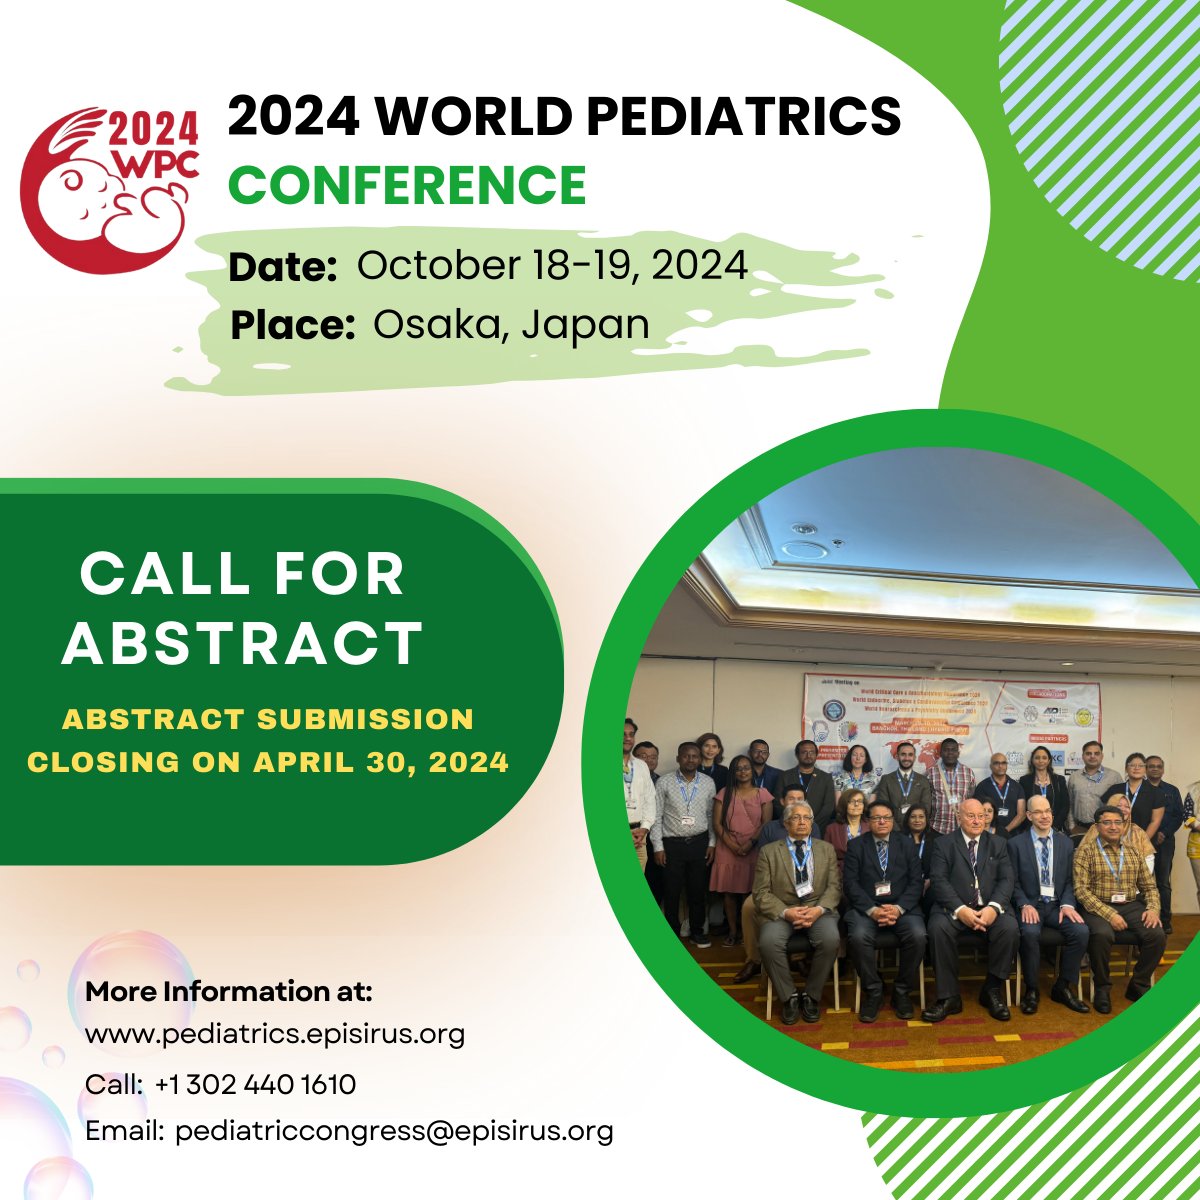 The deadline for #2024WPC abstract submissions is quickly approaching! Don't miss the opportunity. Submit abstract: pediatrics.episirus.org/abstract-submi… #Abstractsubmission #CPD #healthcareprofessional #CallforAbstract #2024wpc #Japanconference #medicalconference #healthconference #pediatrics